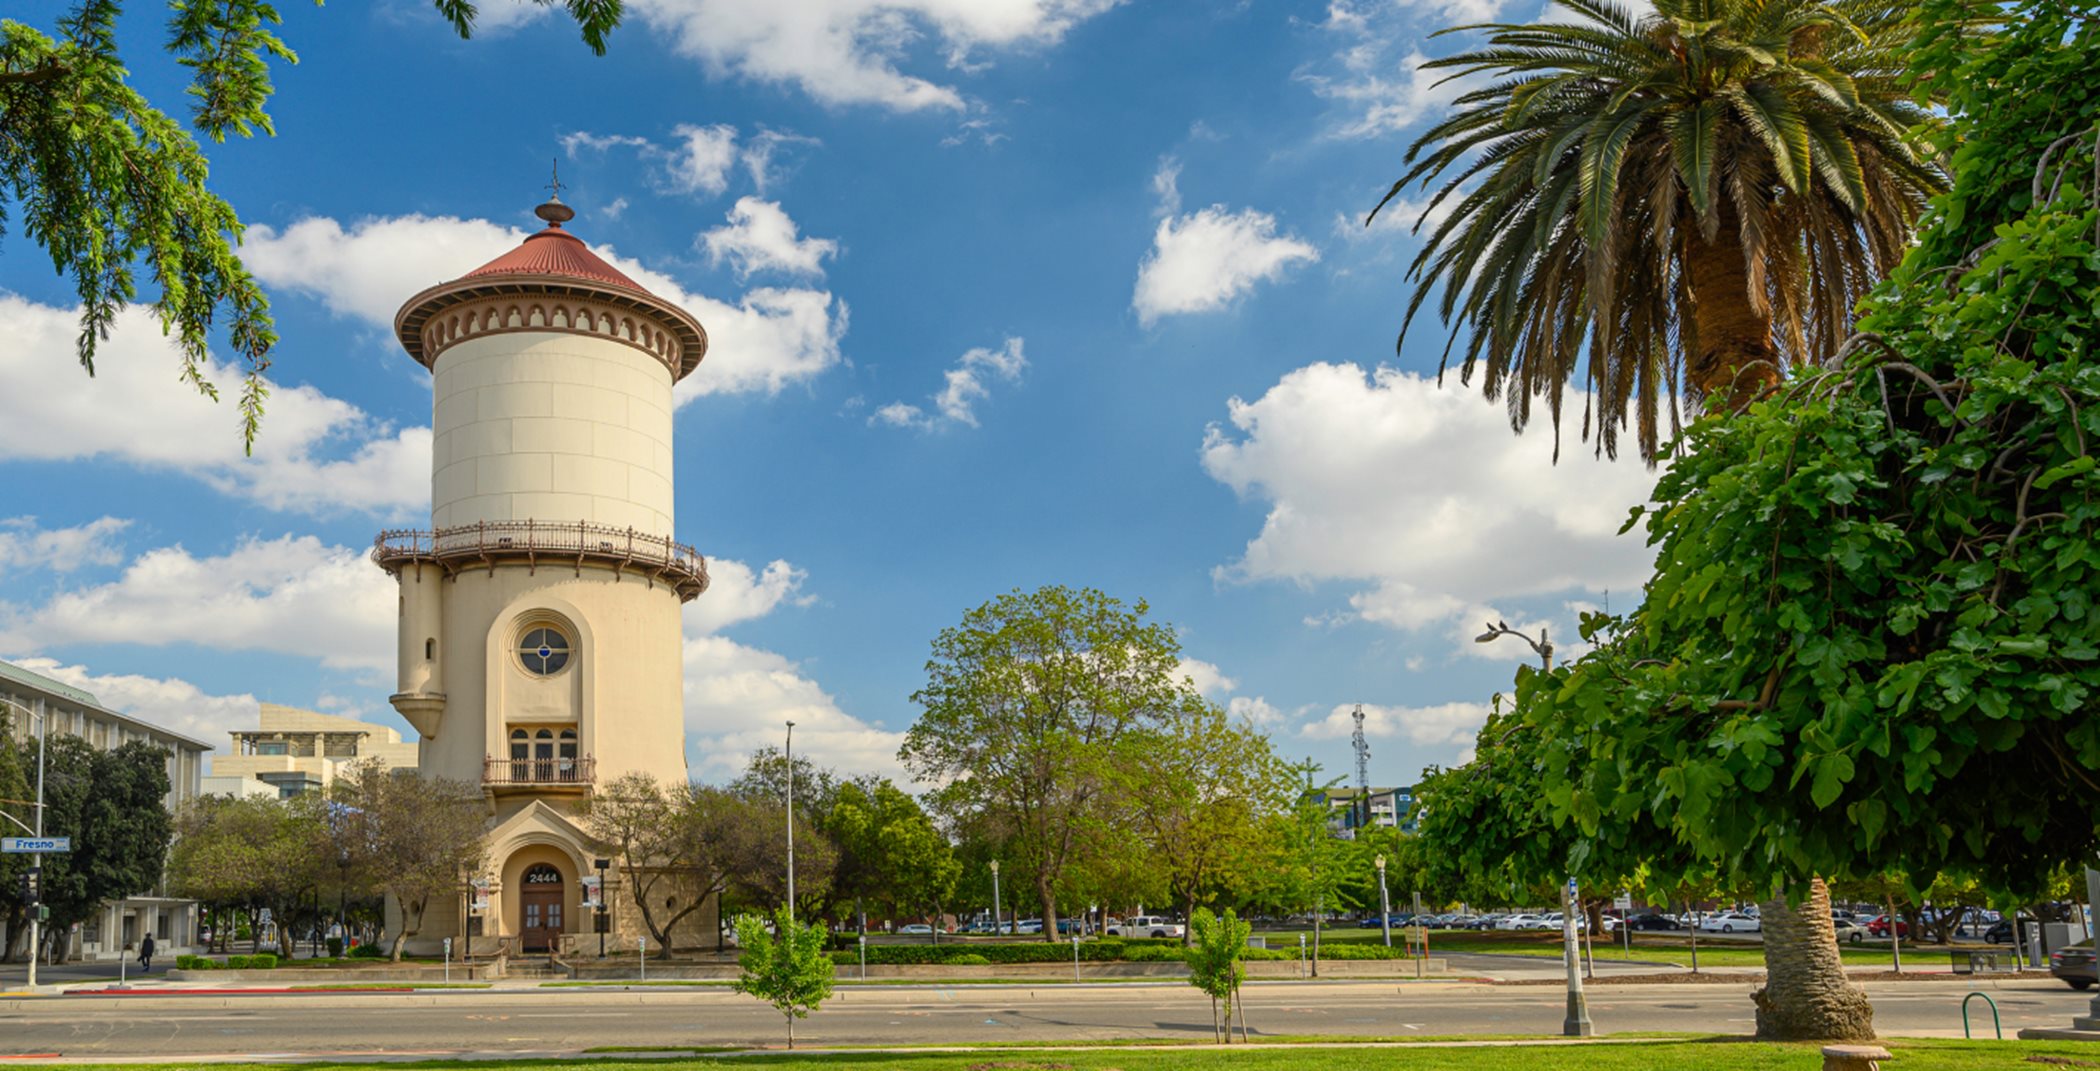 Historic Fresno Water Tower in blue skies